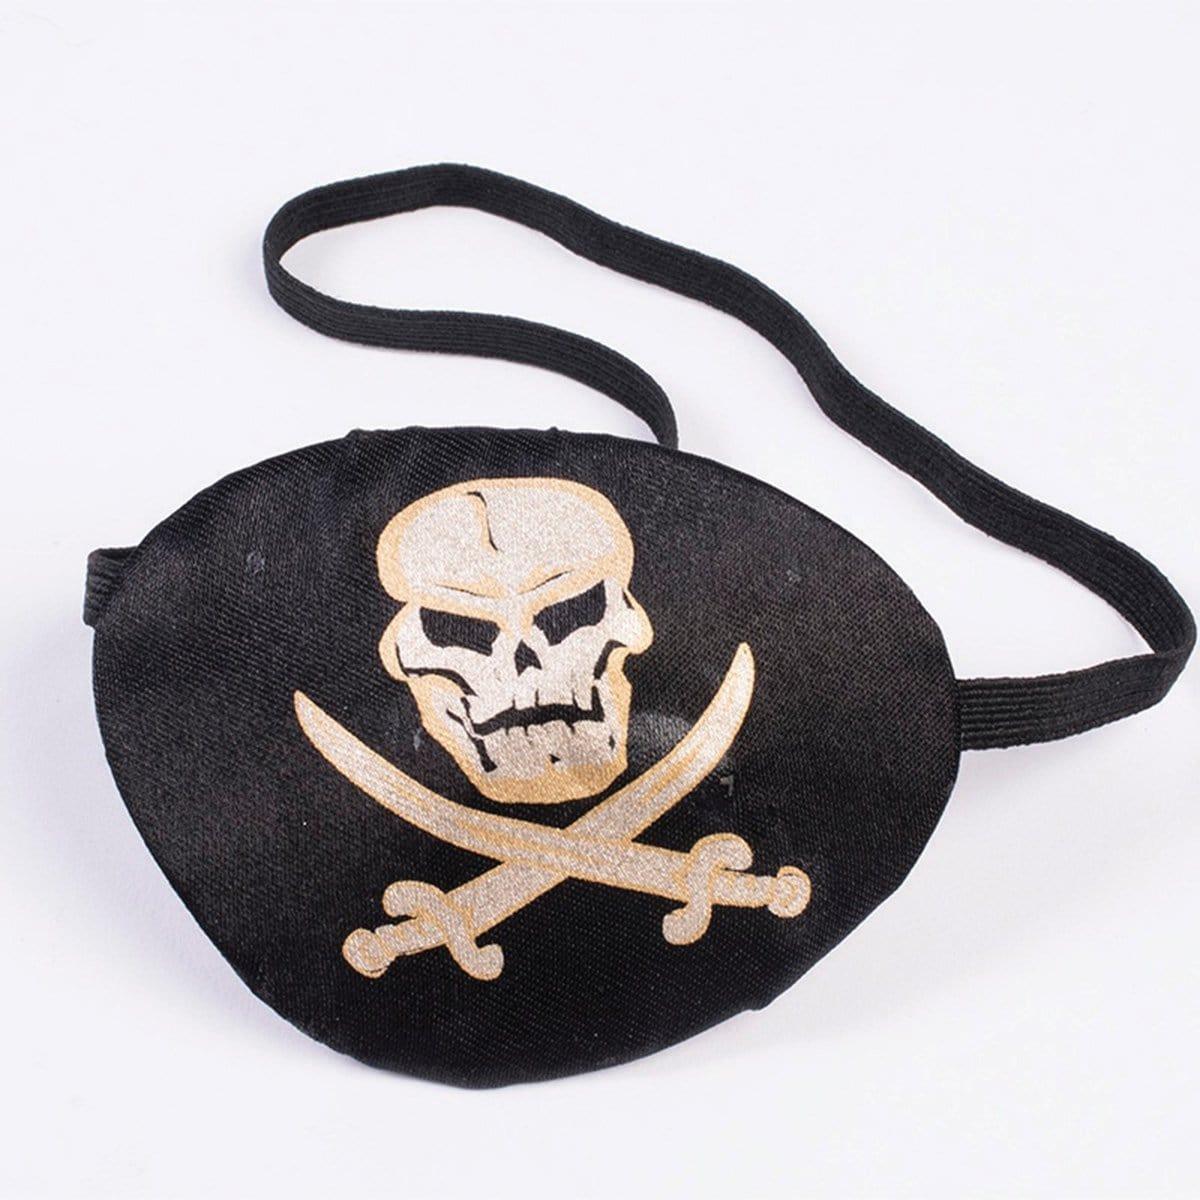 Buy Costume Accessories Pirate eye patch with skeleton print sold at Party Expert